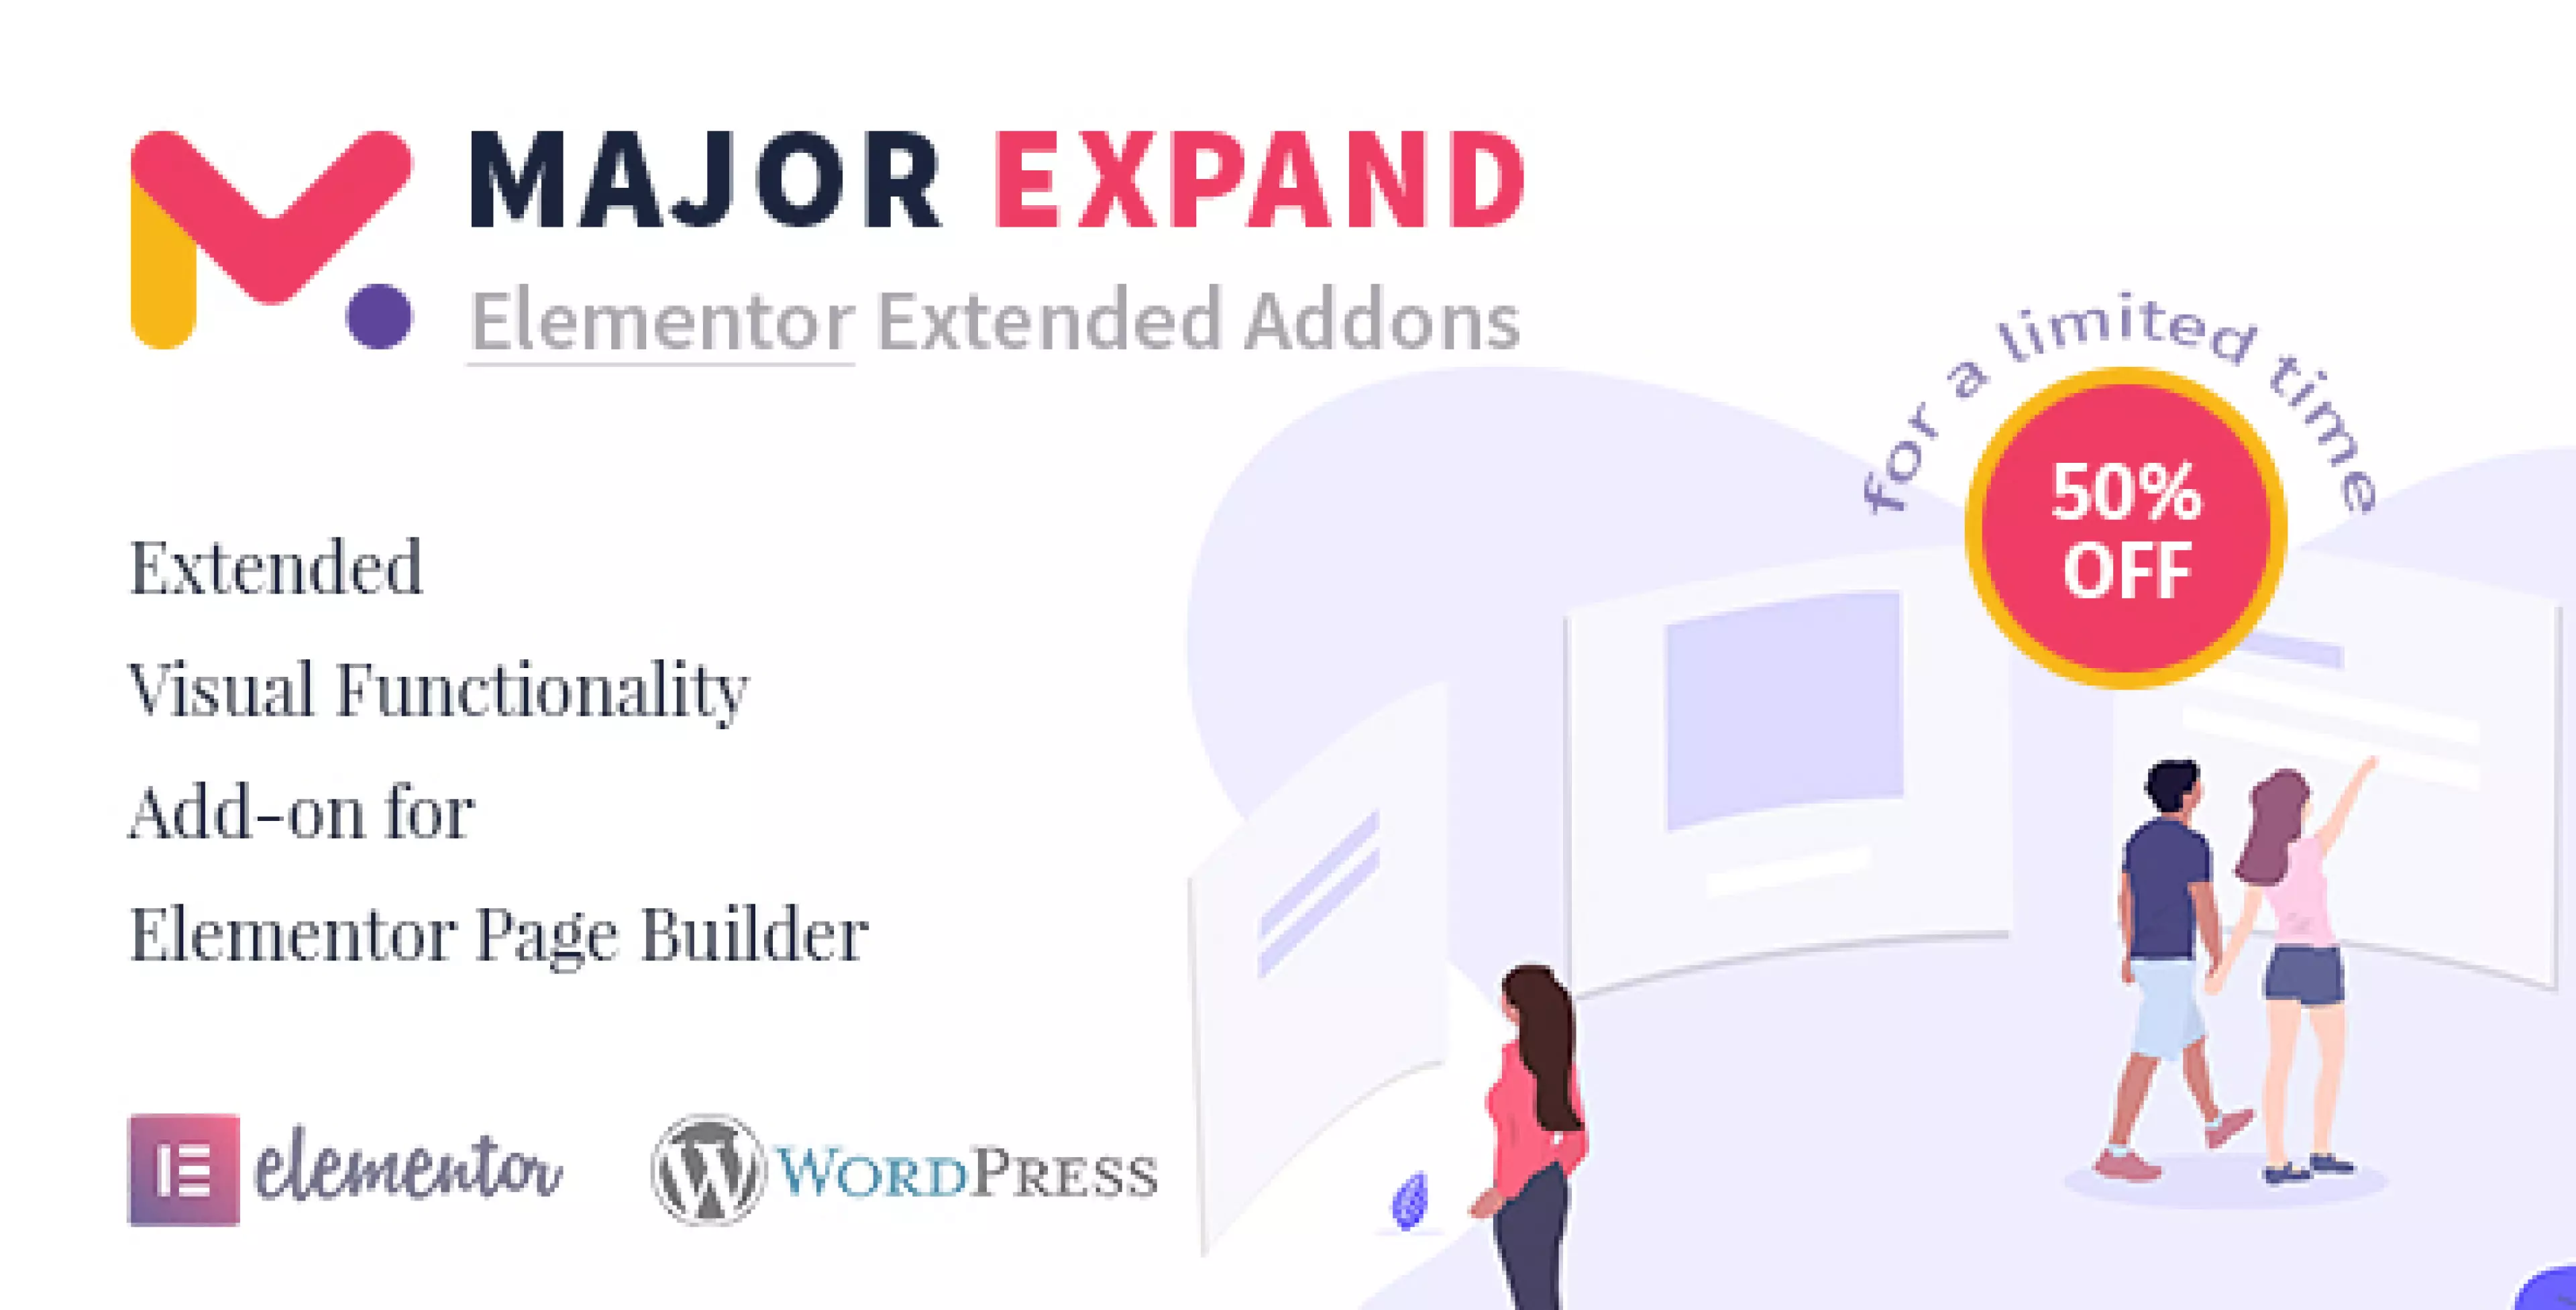 Major Expand: Extended Visual Functionality Add-on for Elementor Page Builder